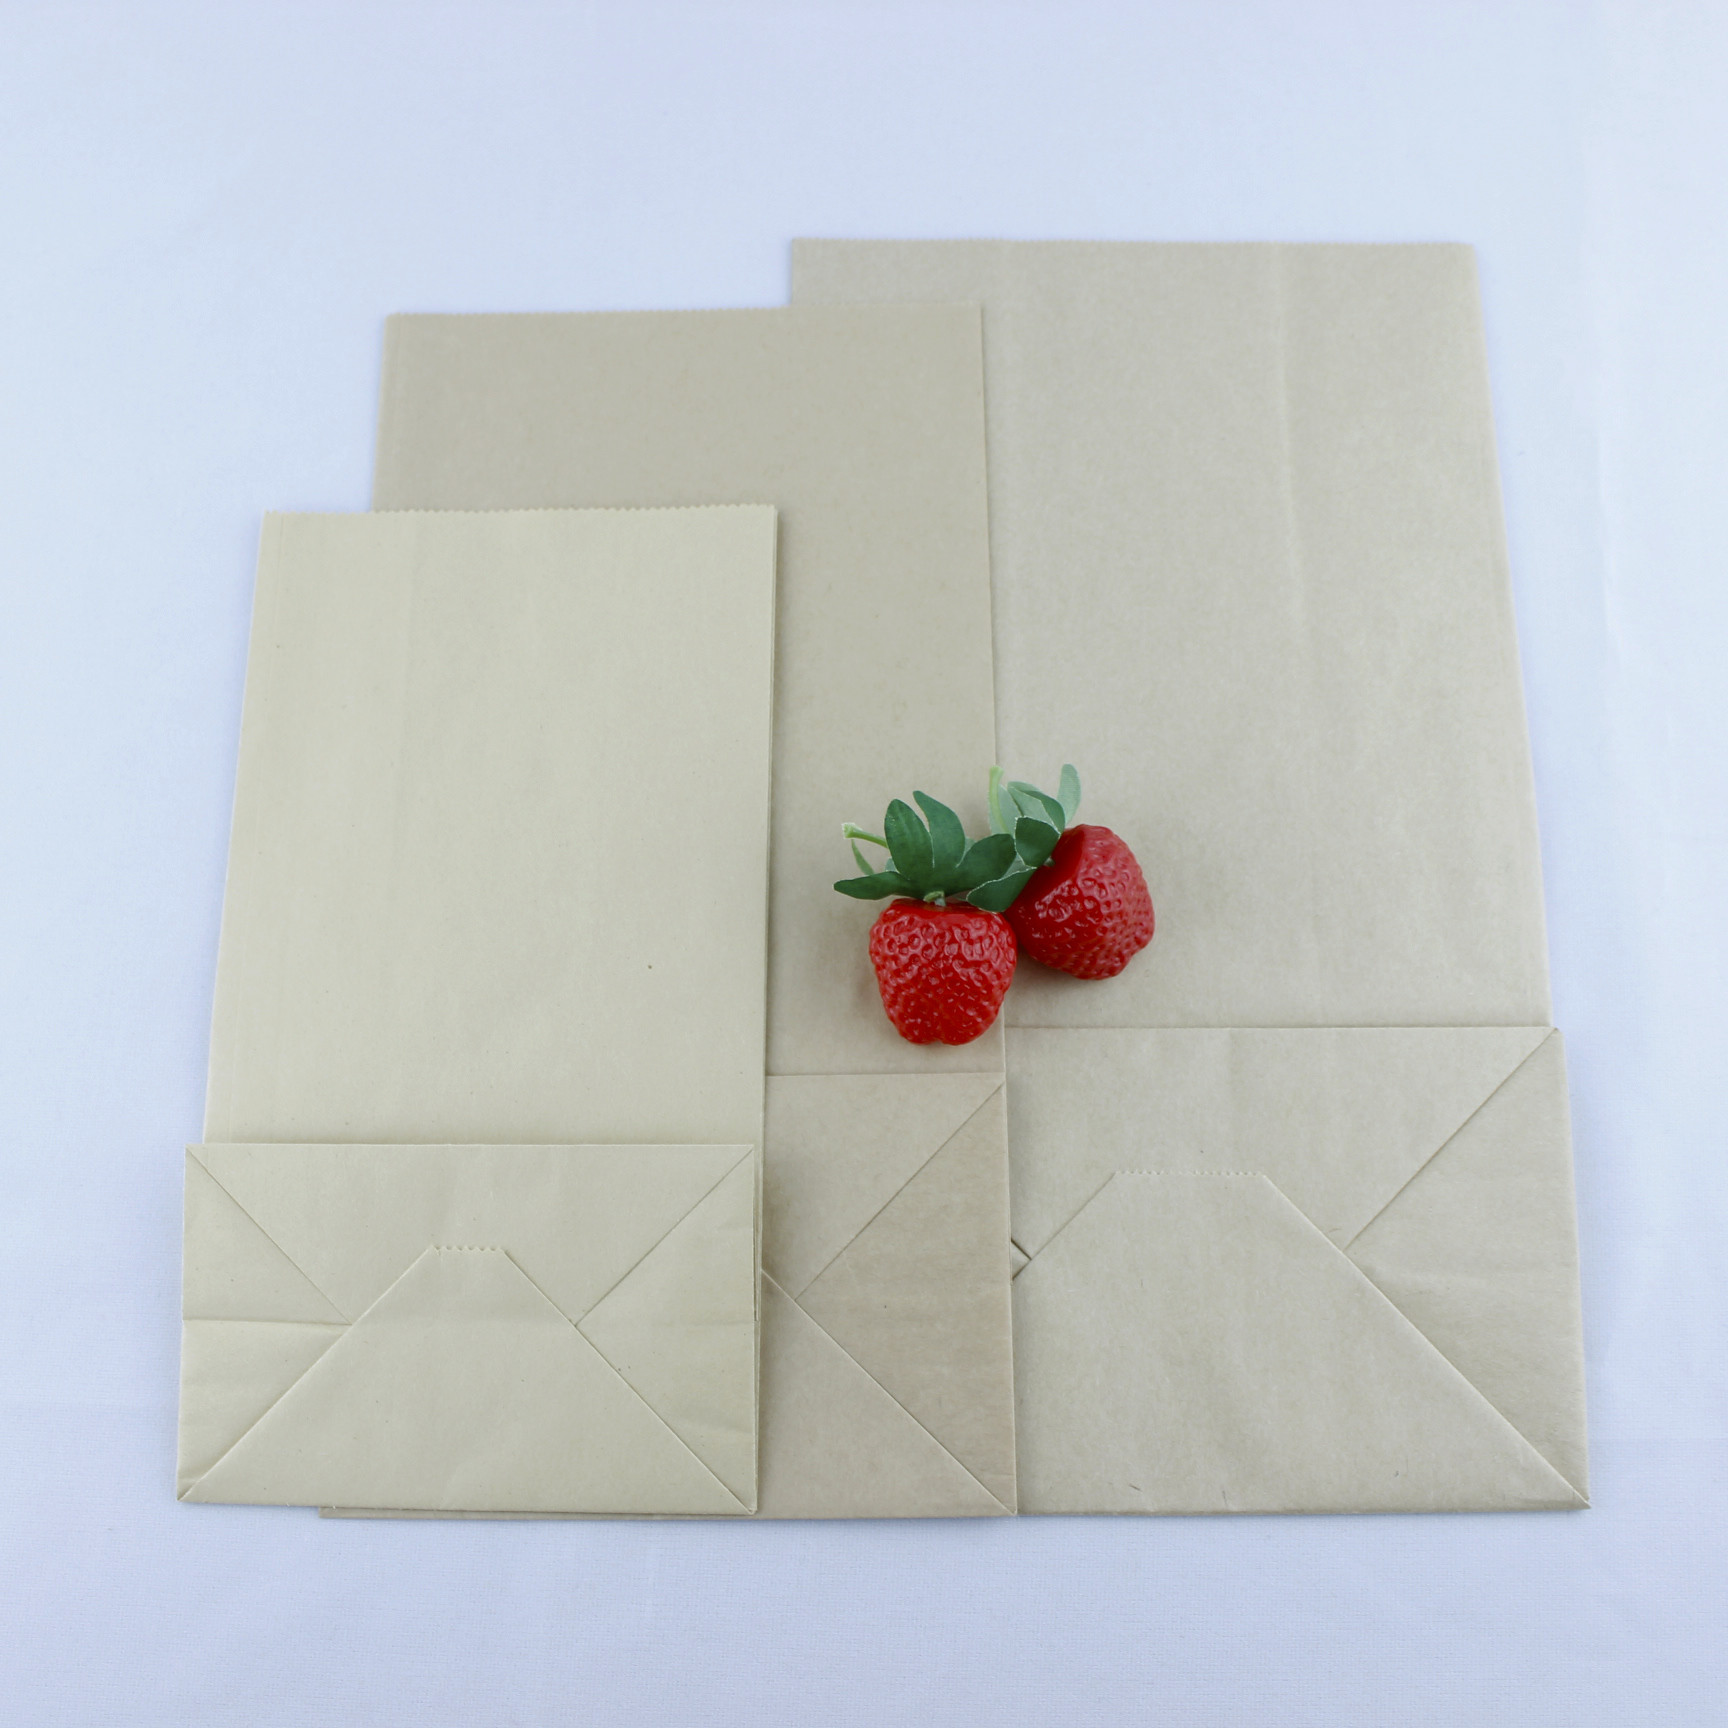 Quality Biodegradable Recycled Kraft Paper Bags Flat Bottom With Twisted Handles for sale